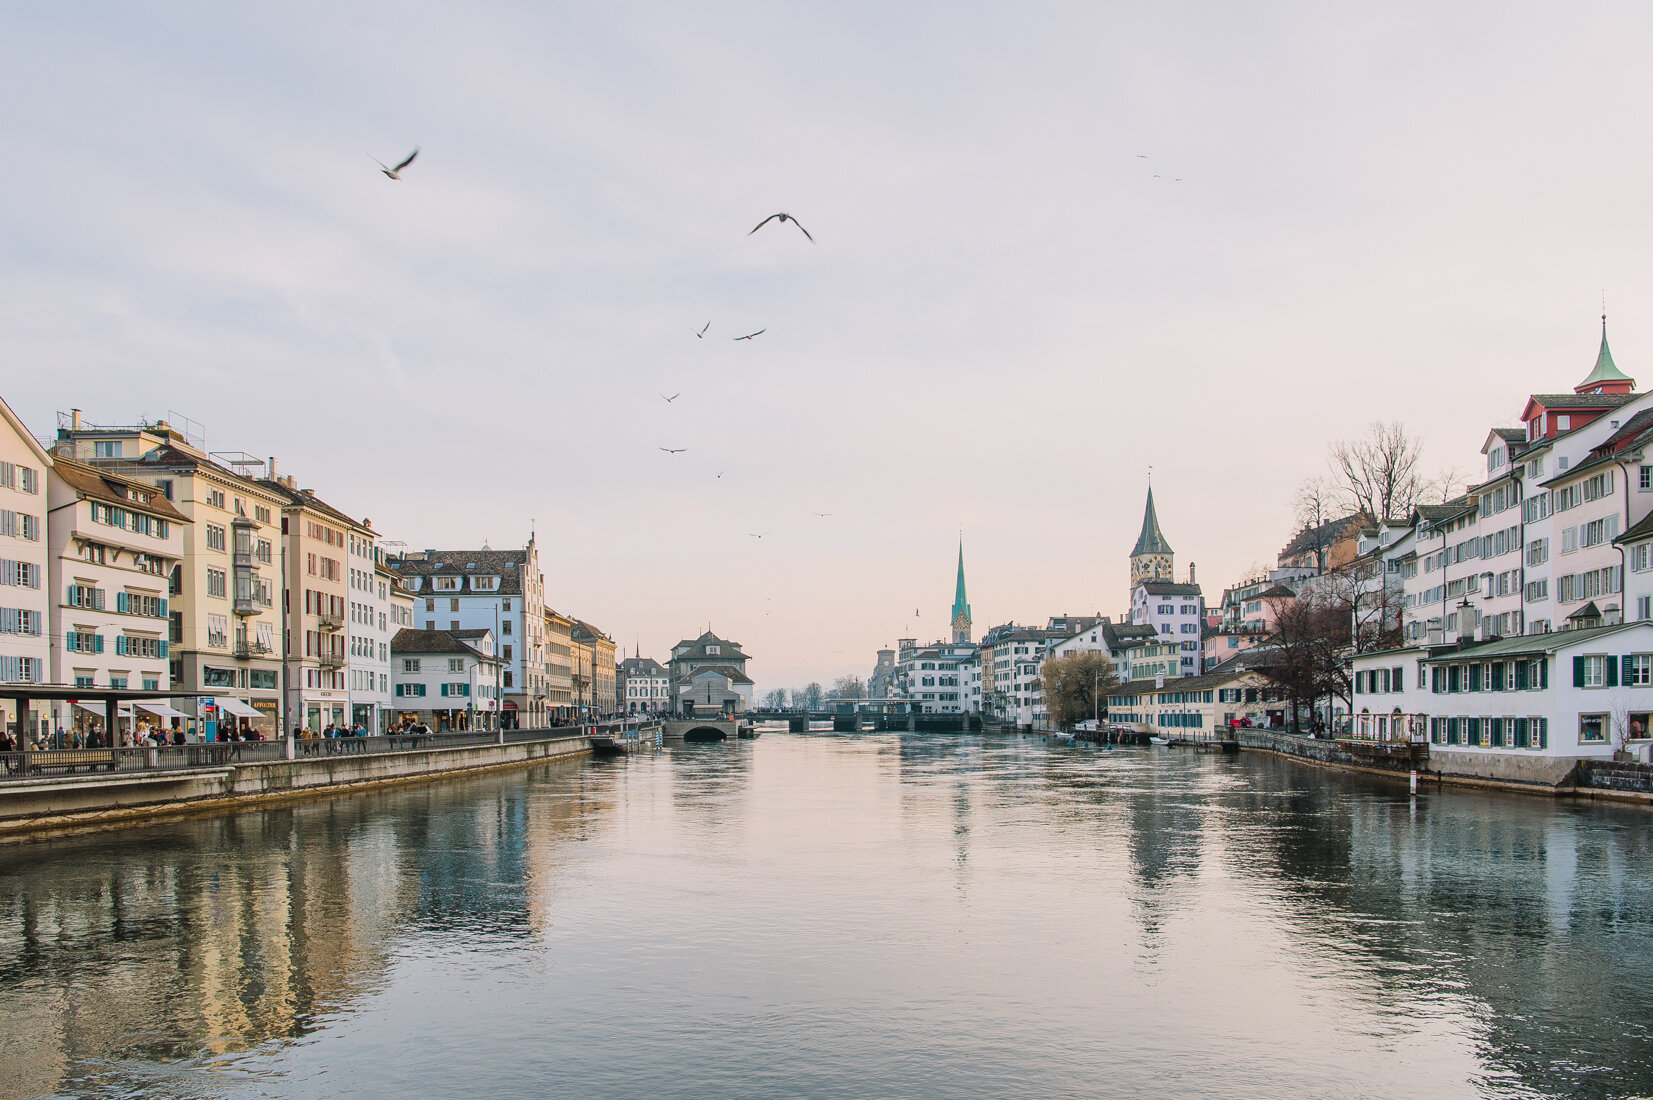  Evening in Zurich, Switzerland. The Limmat river divides both old parts of the town. Fraumünster church (with turquoise spire) and St. Peter on the right side. Limmatquai, which is car-free and tram-only, on the left. 